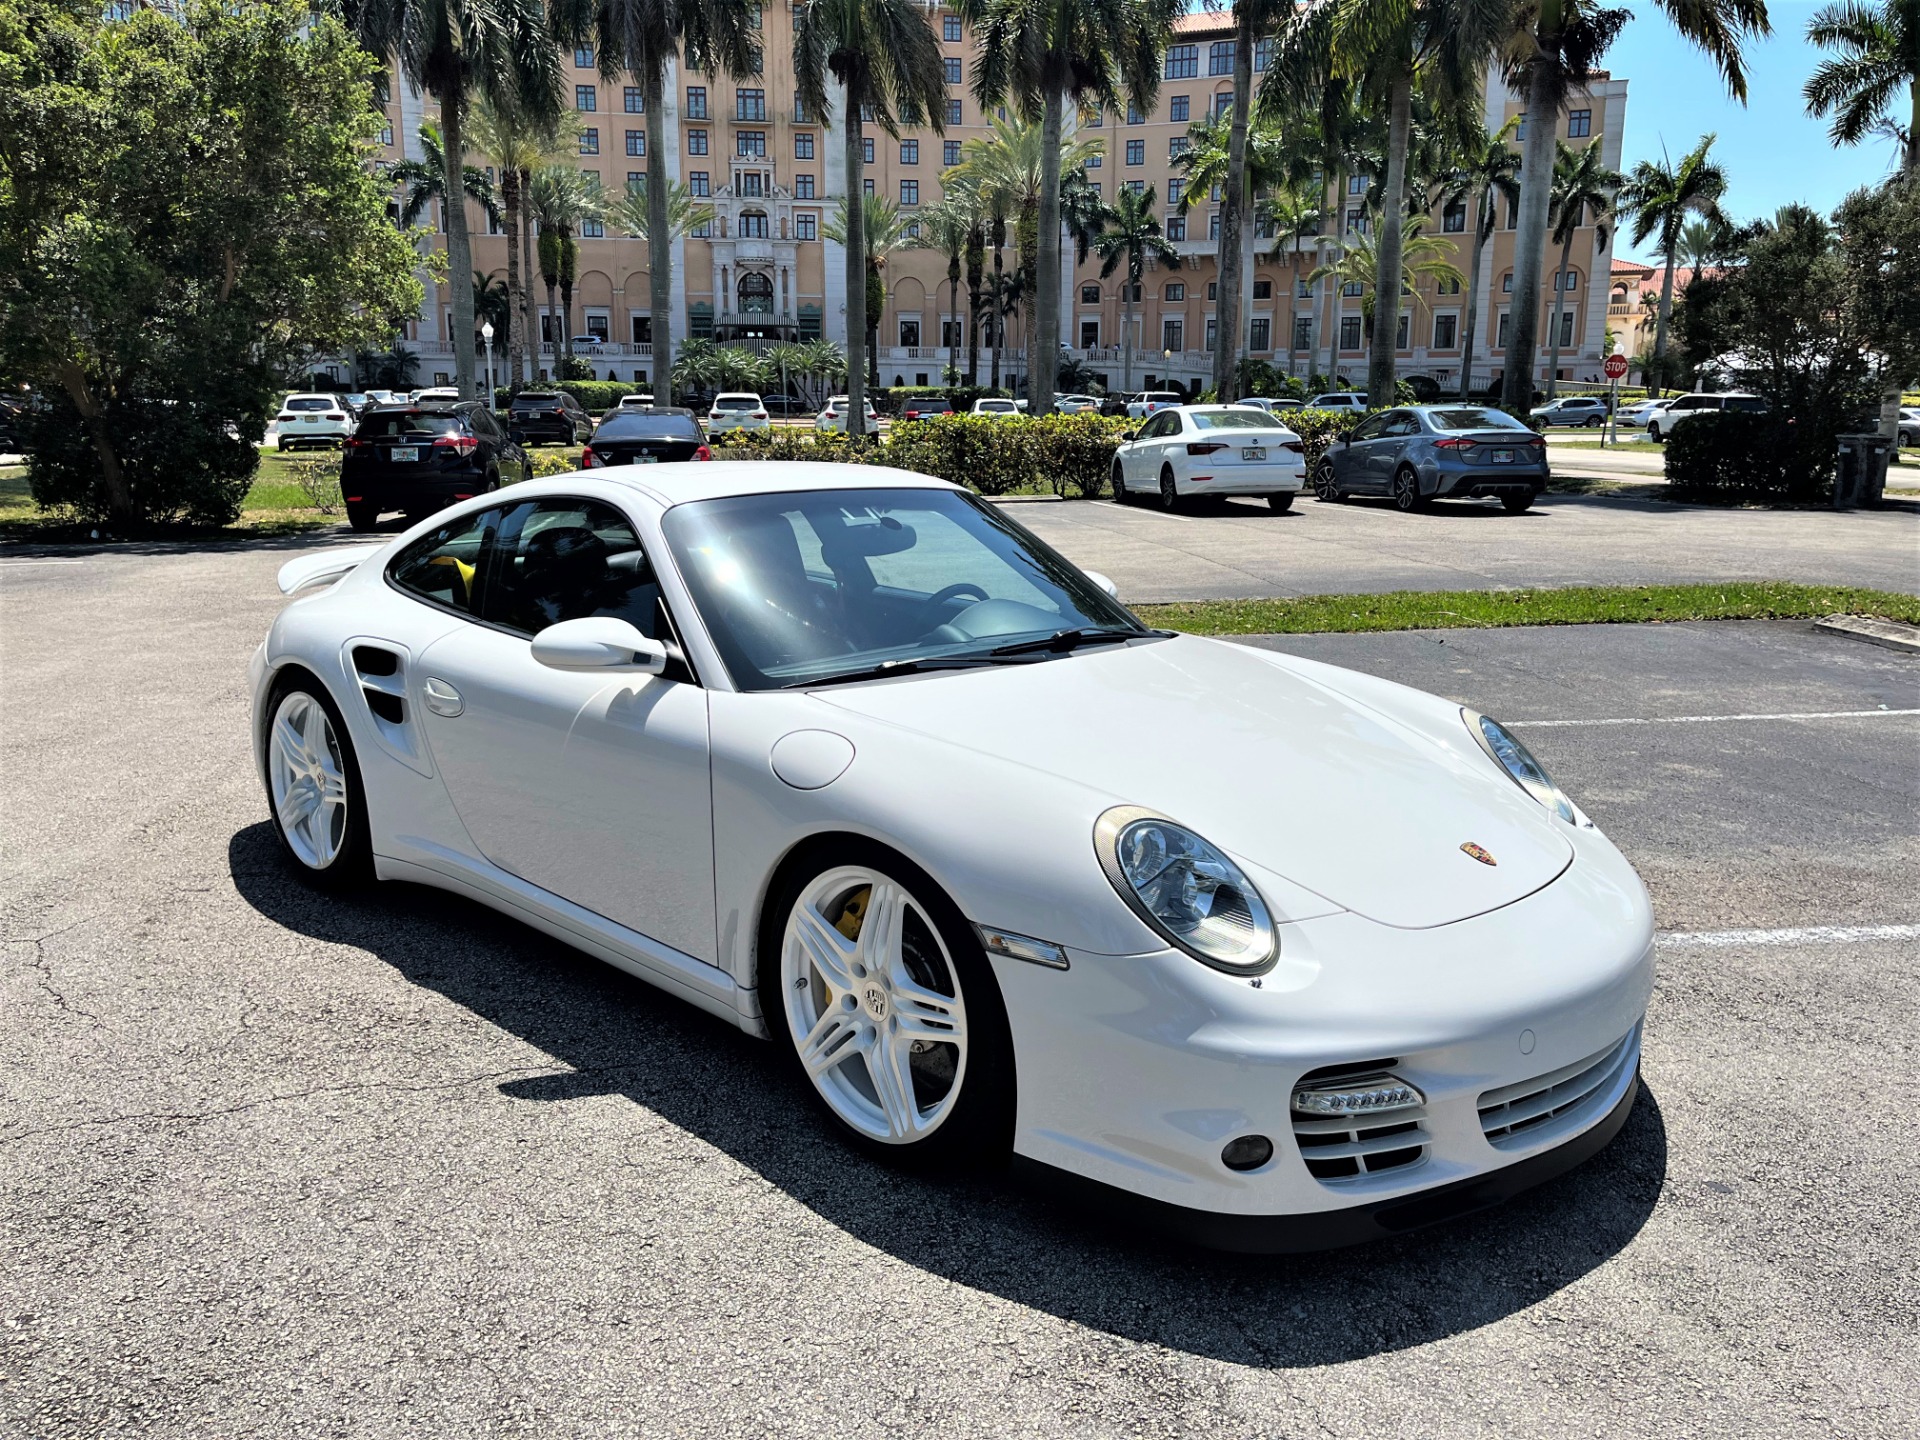 Used 2008 Porsche 911 Turbo for sale Sold at The Gables Sports Cars in Miami FL 33146 1